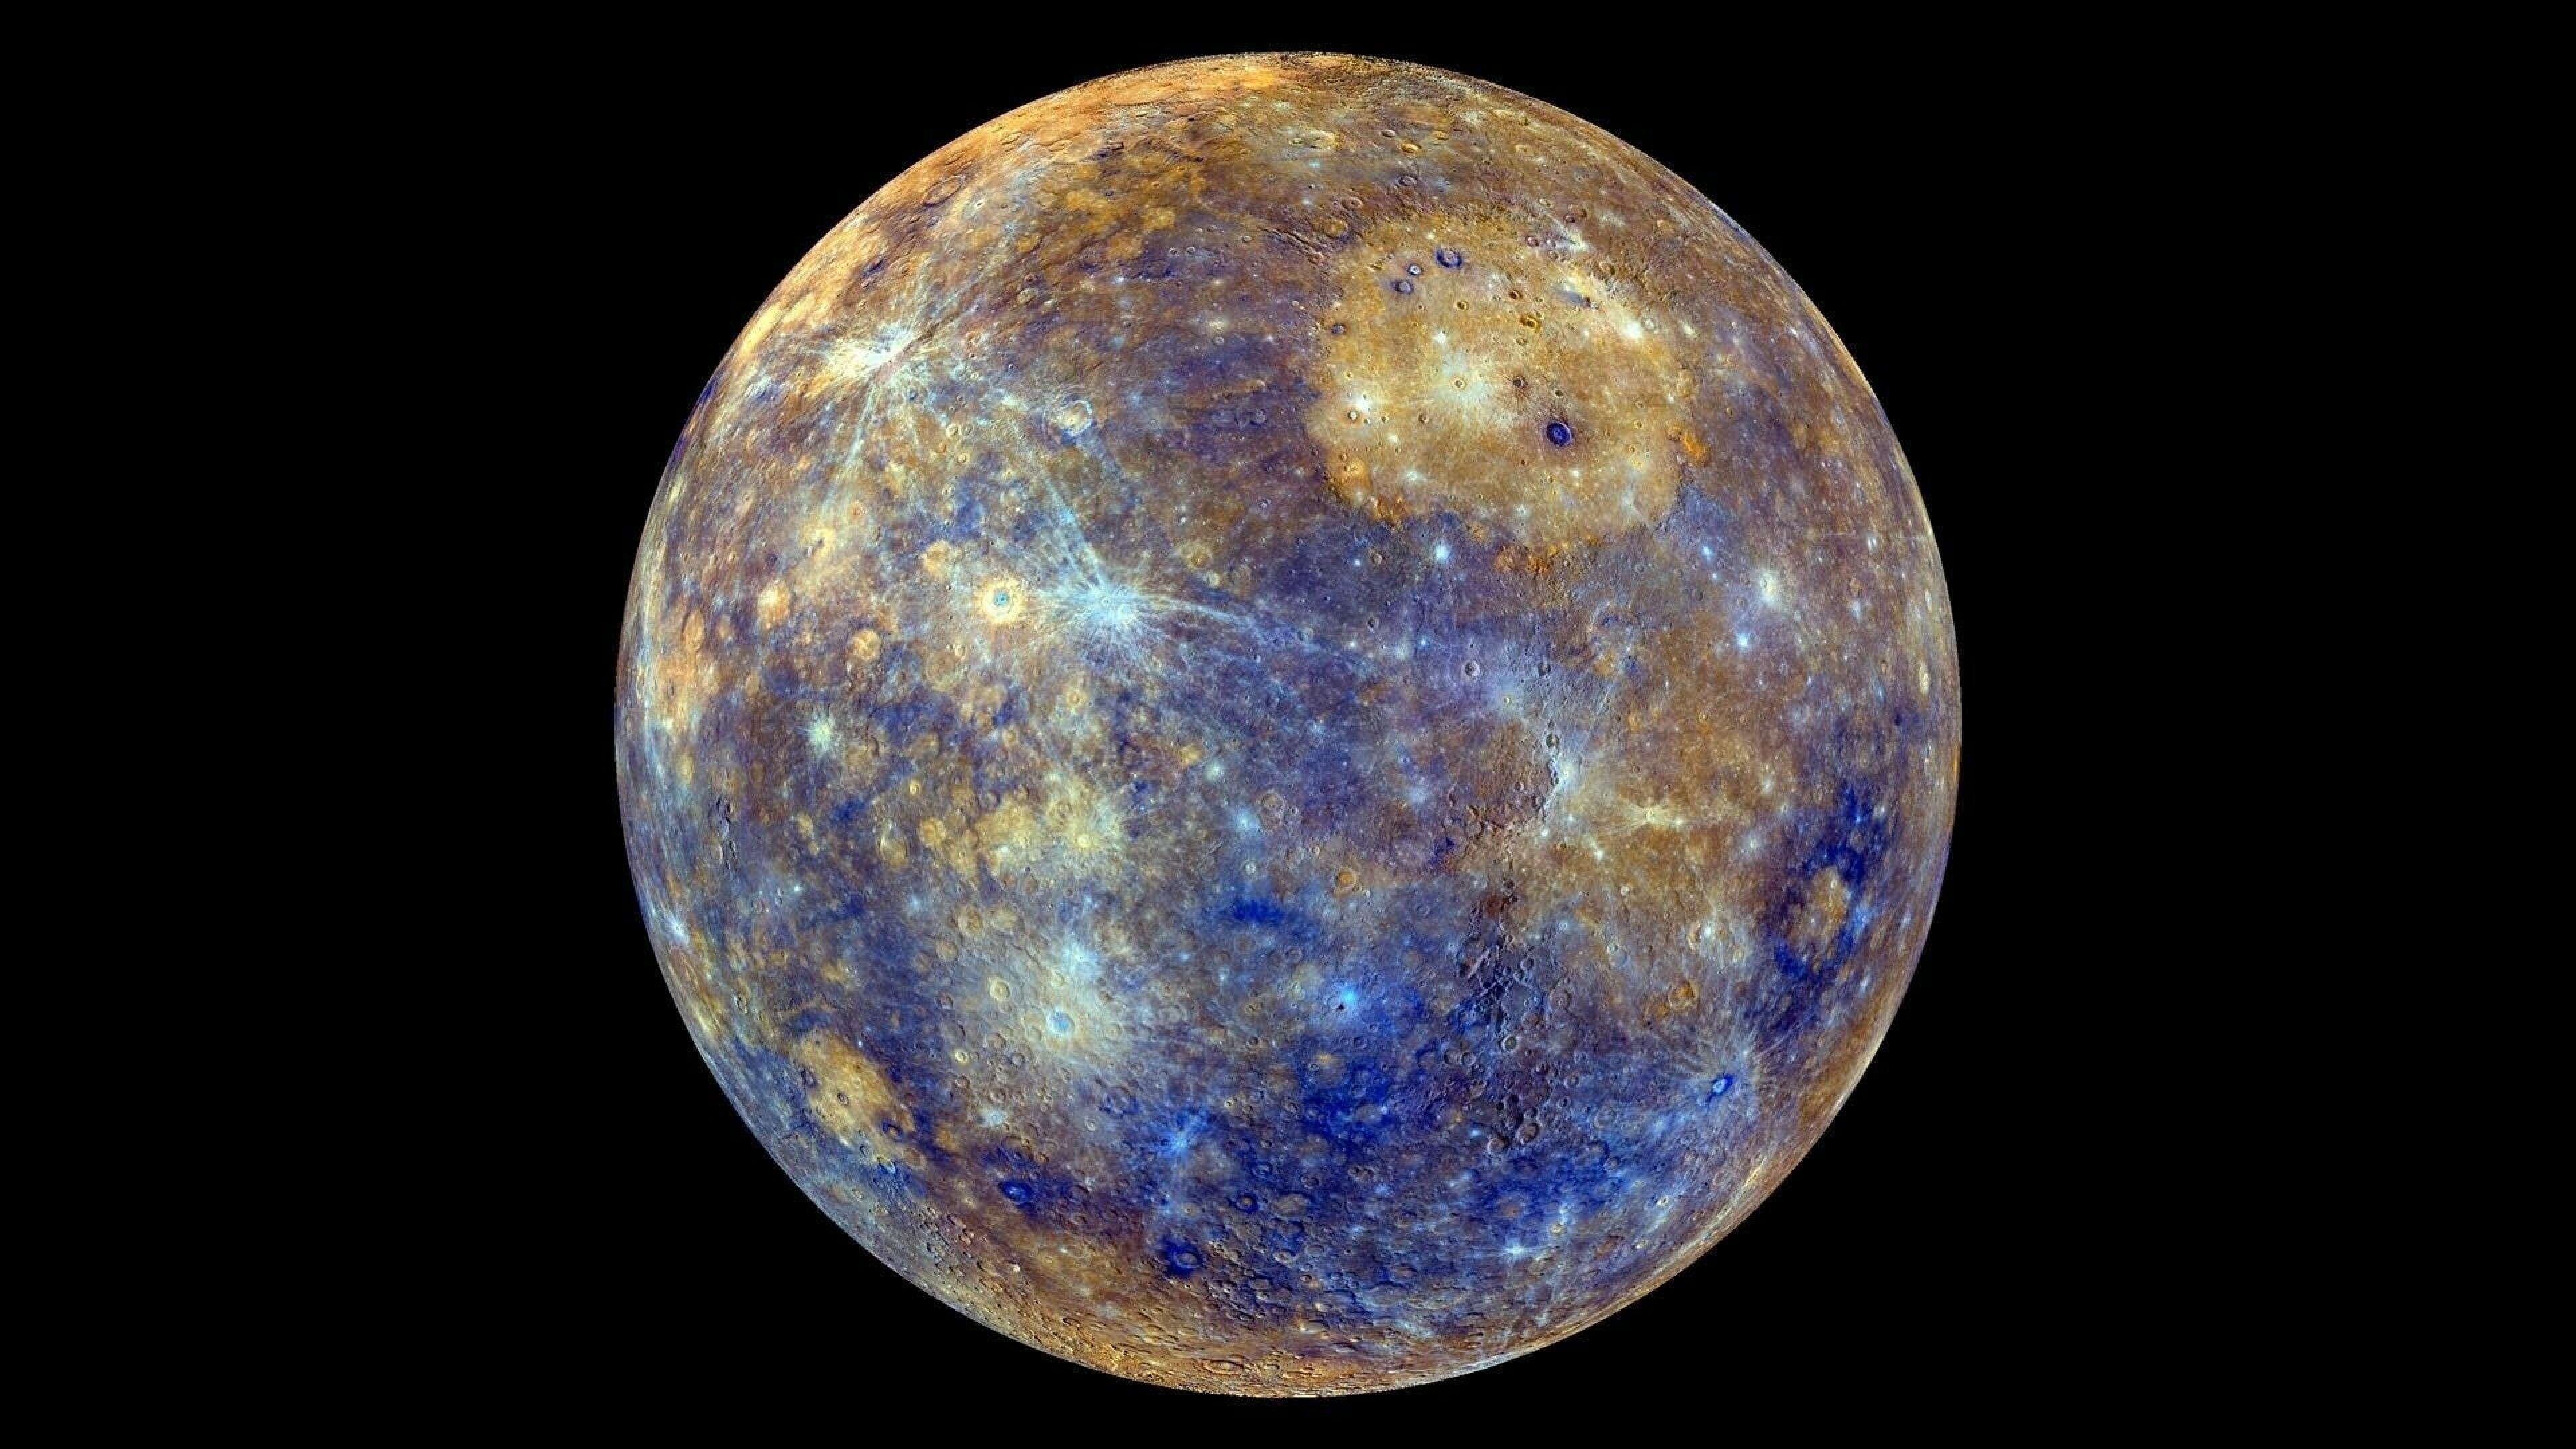 Mercury: NASA, The smallest planet in the Solar System and the closest to the Sun. 3840x2160 4K Wallpaper.